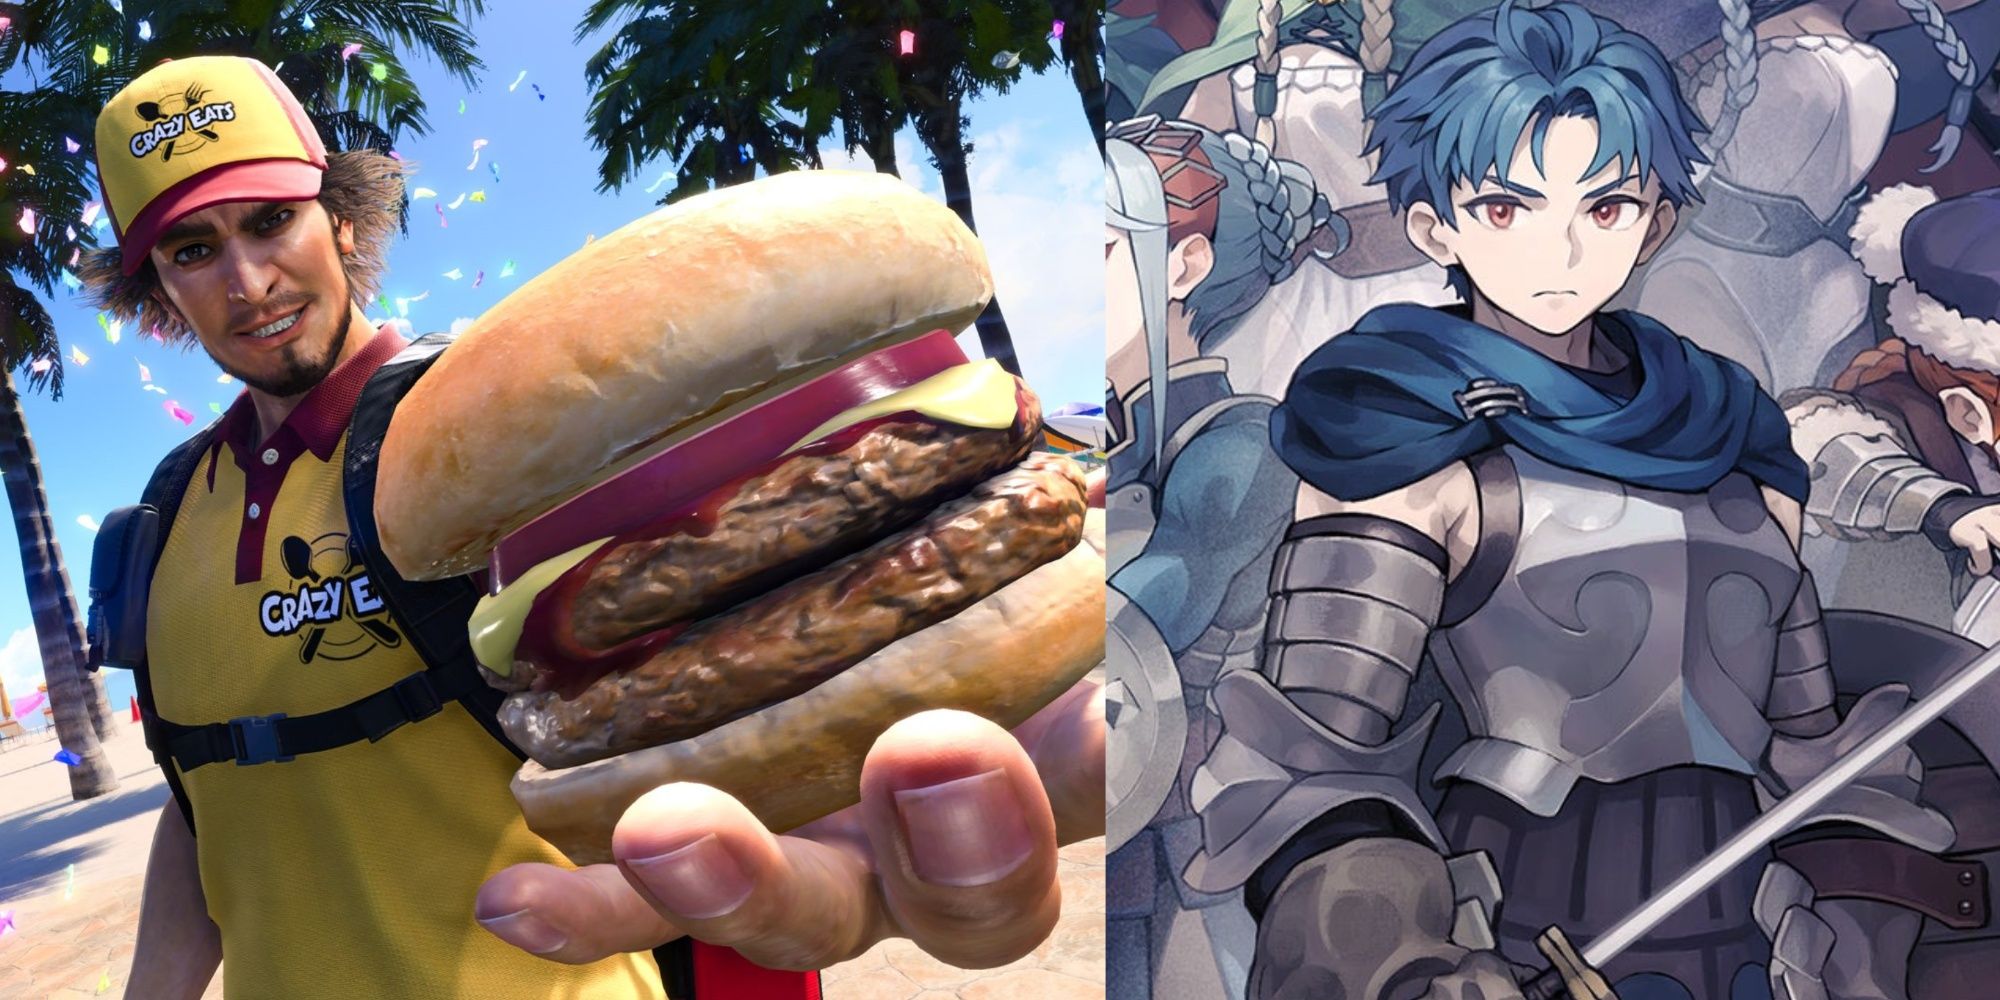 ichiban with a burger in infinite wealth, and the lead character in unicorn overlord